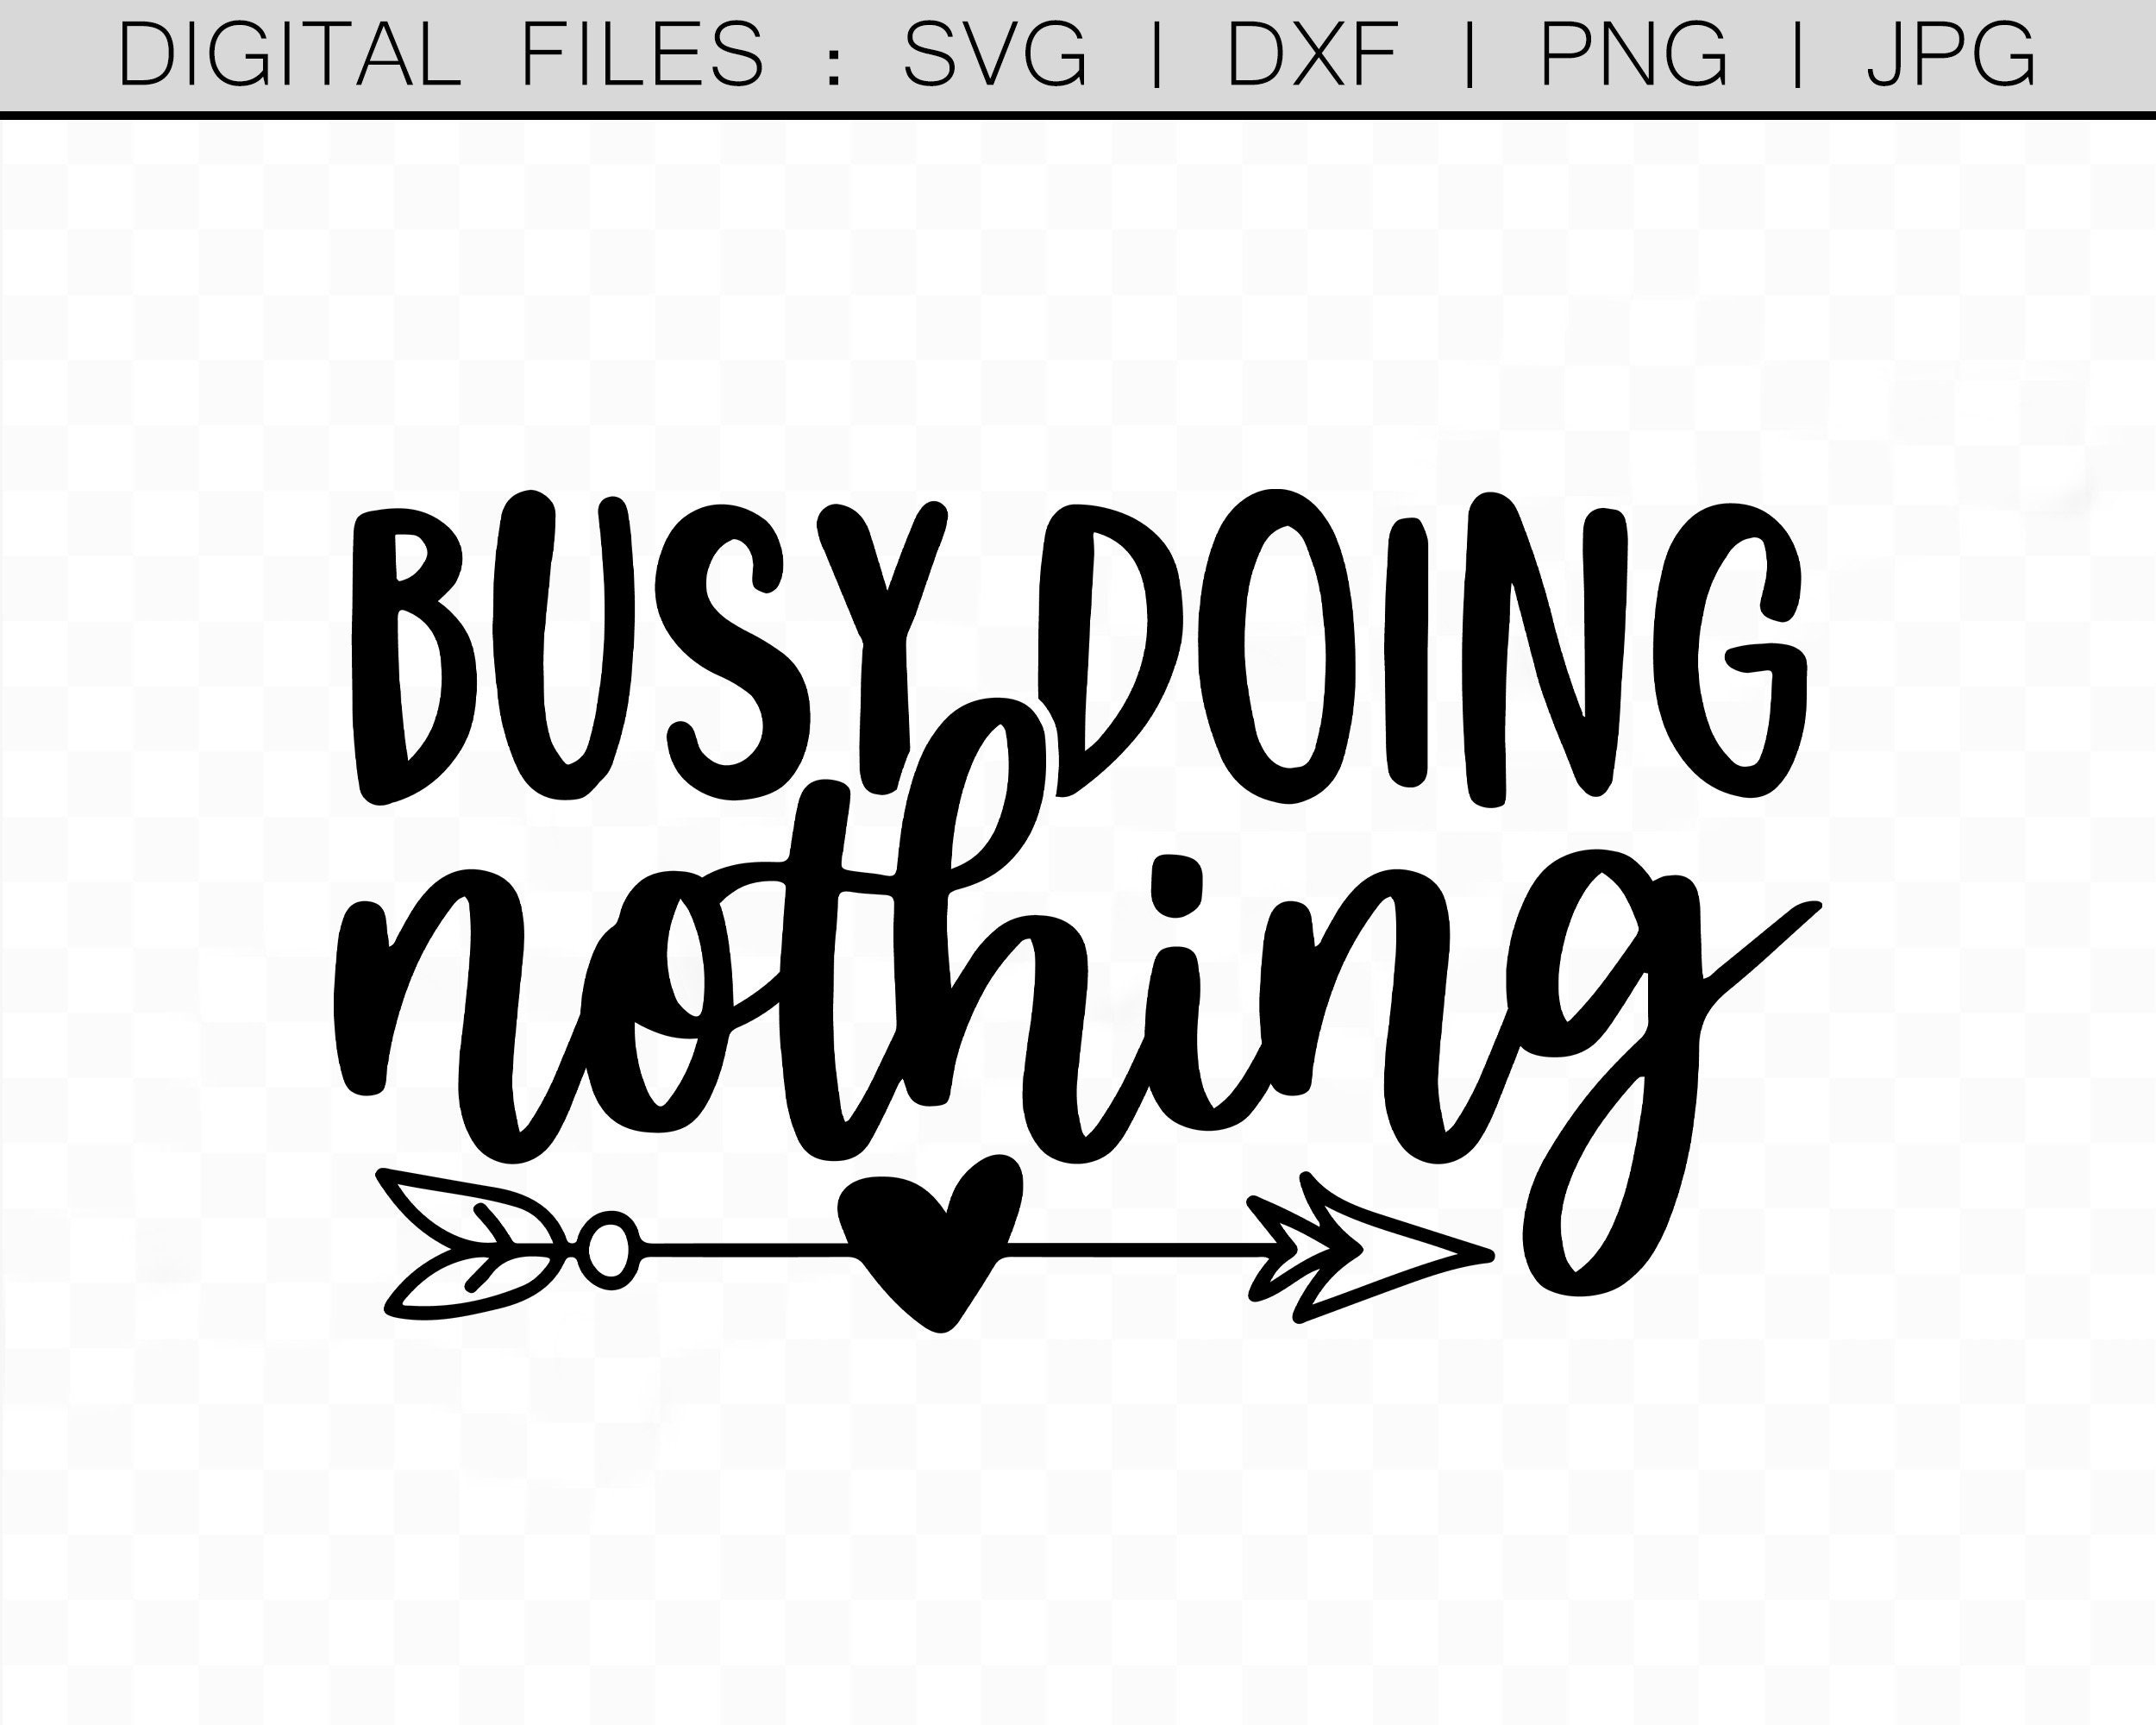 Be Anxious for Nothing, Philippians 4:6, Christian Sticker, Bible Quotes,  Religious Sticker, Jesus Decal, Die Cut Sticker, Bible Journal 